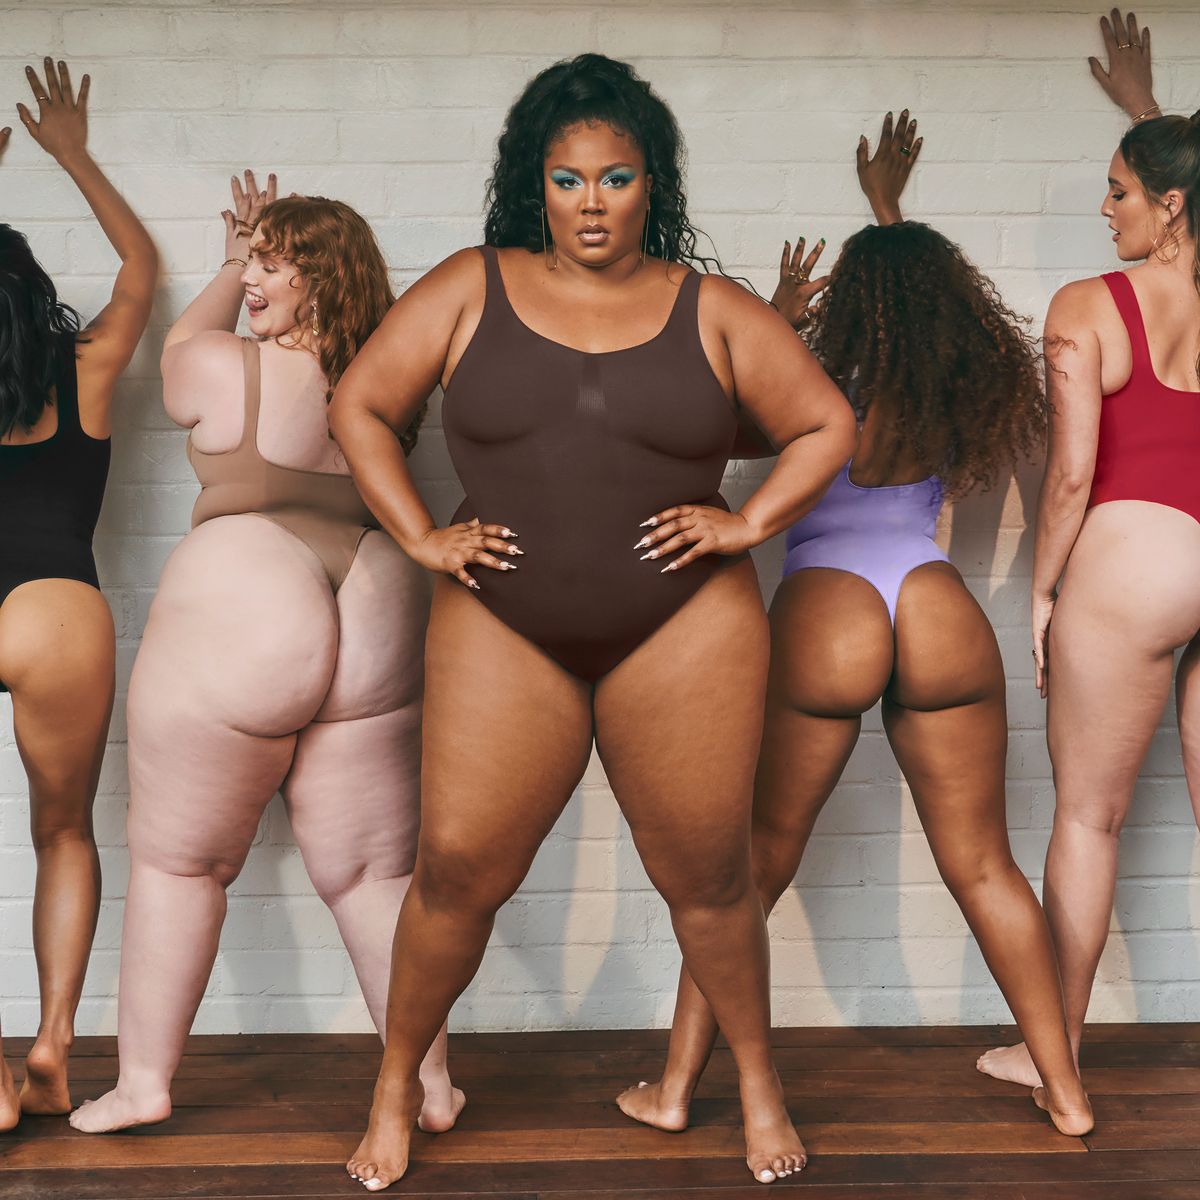 Maybe we should all stop pretending Lizzo's new shapewear brand is